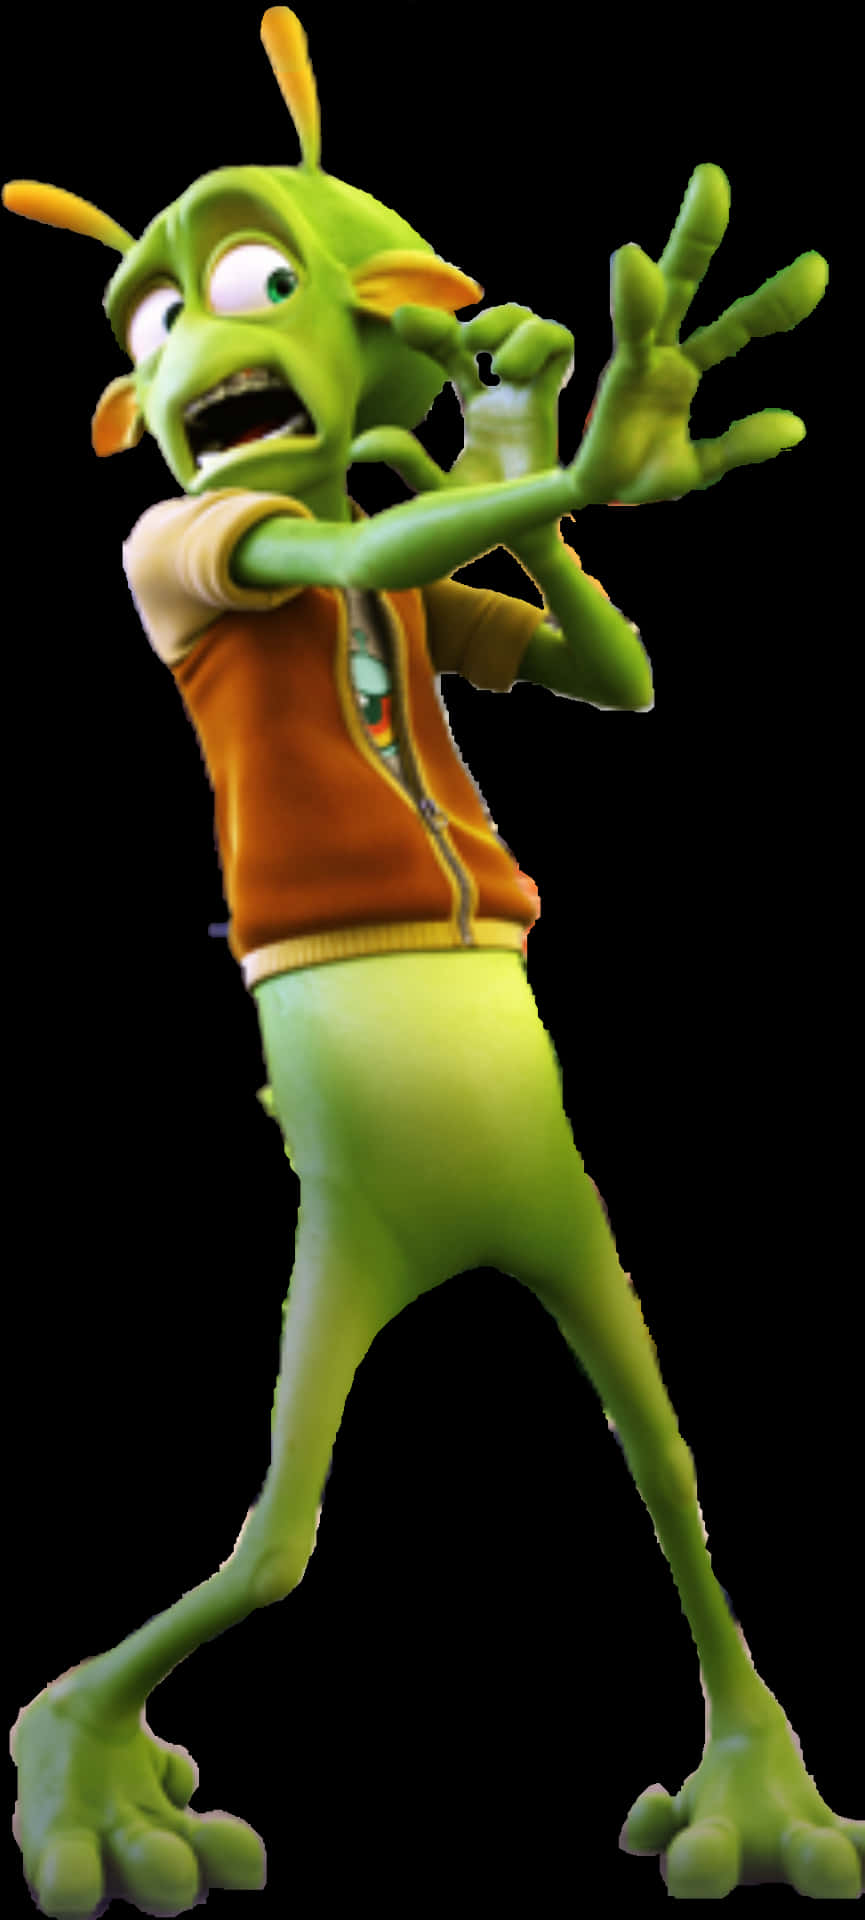 Animated Green Alien Character PNG image